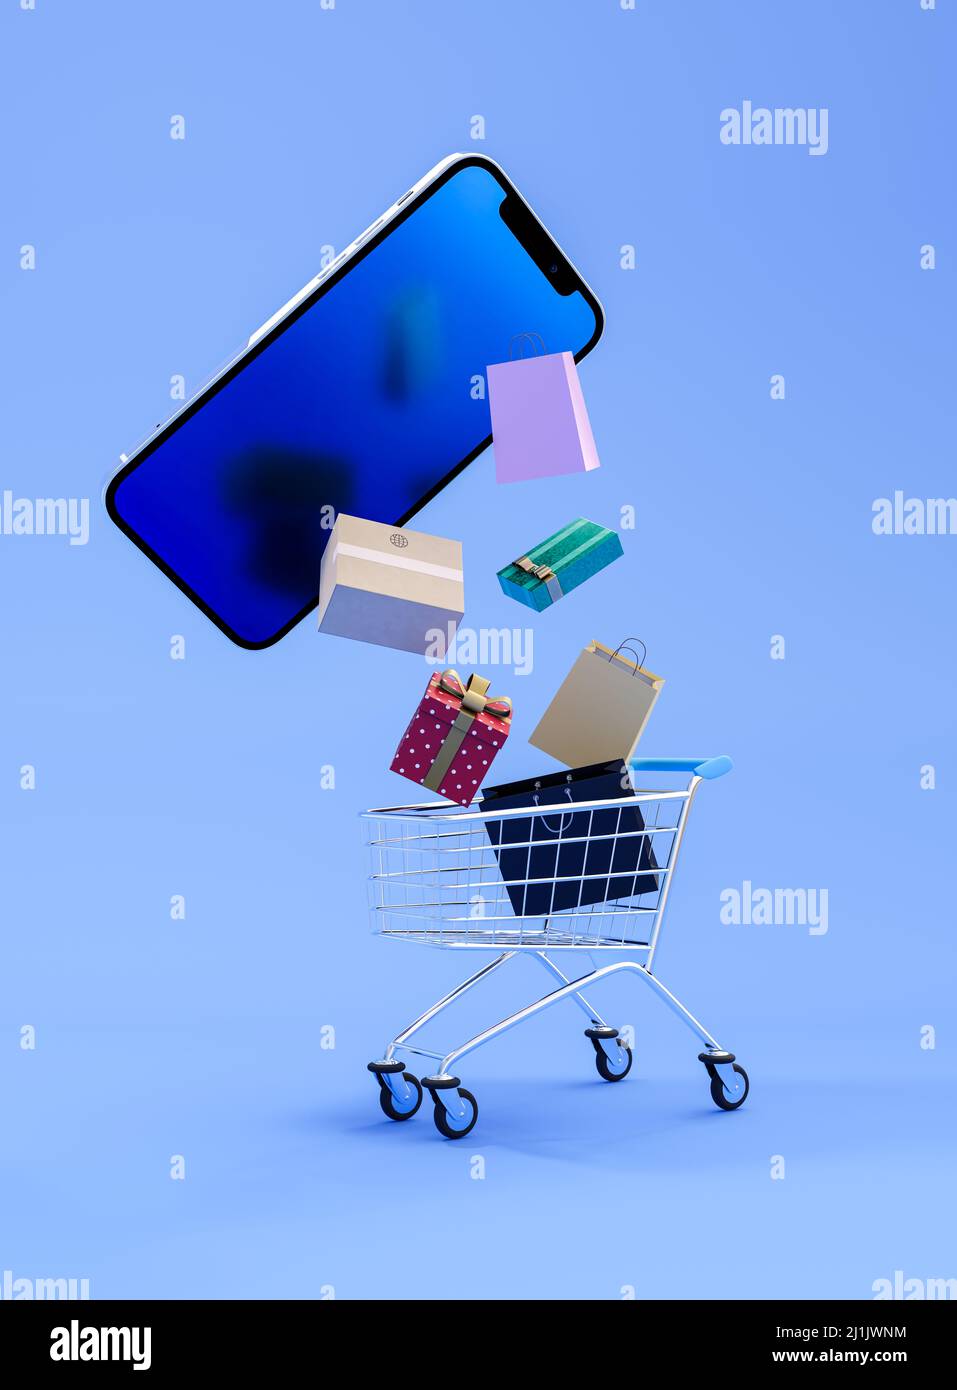 Smartphone, gift present, goods falling into shopping cart isolated on blue background. Online shopping ecommerce concept design. 3D rendering. Stock Photo